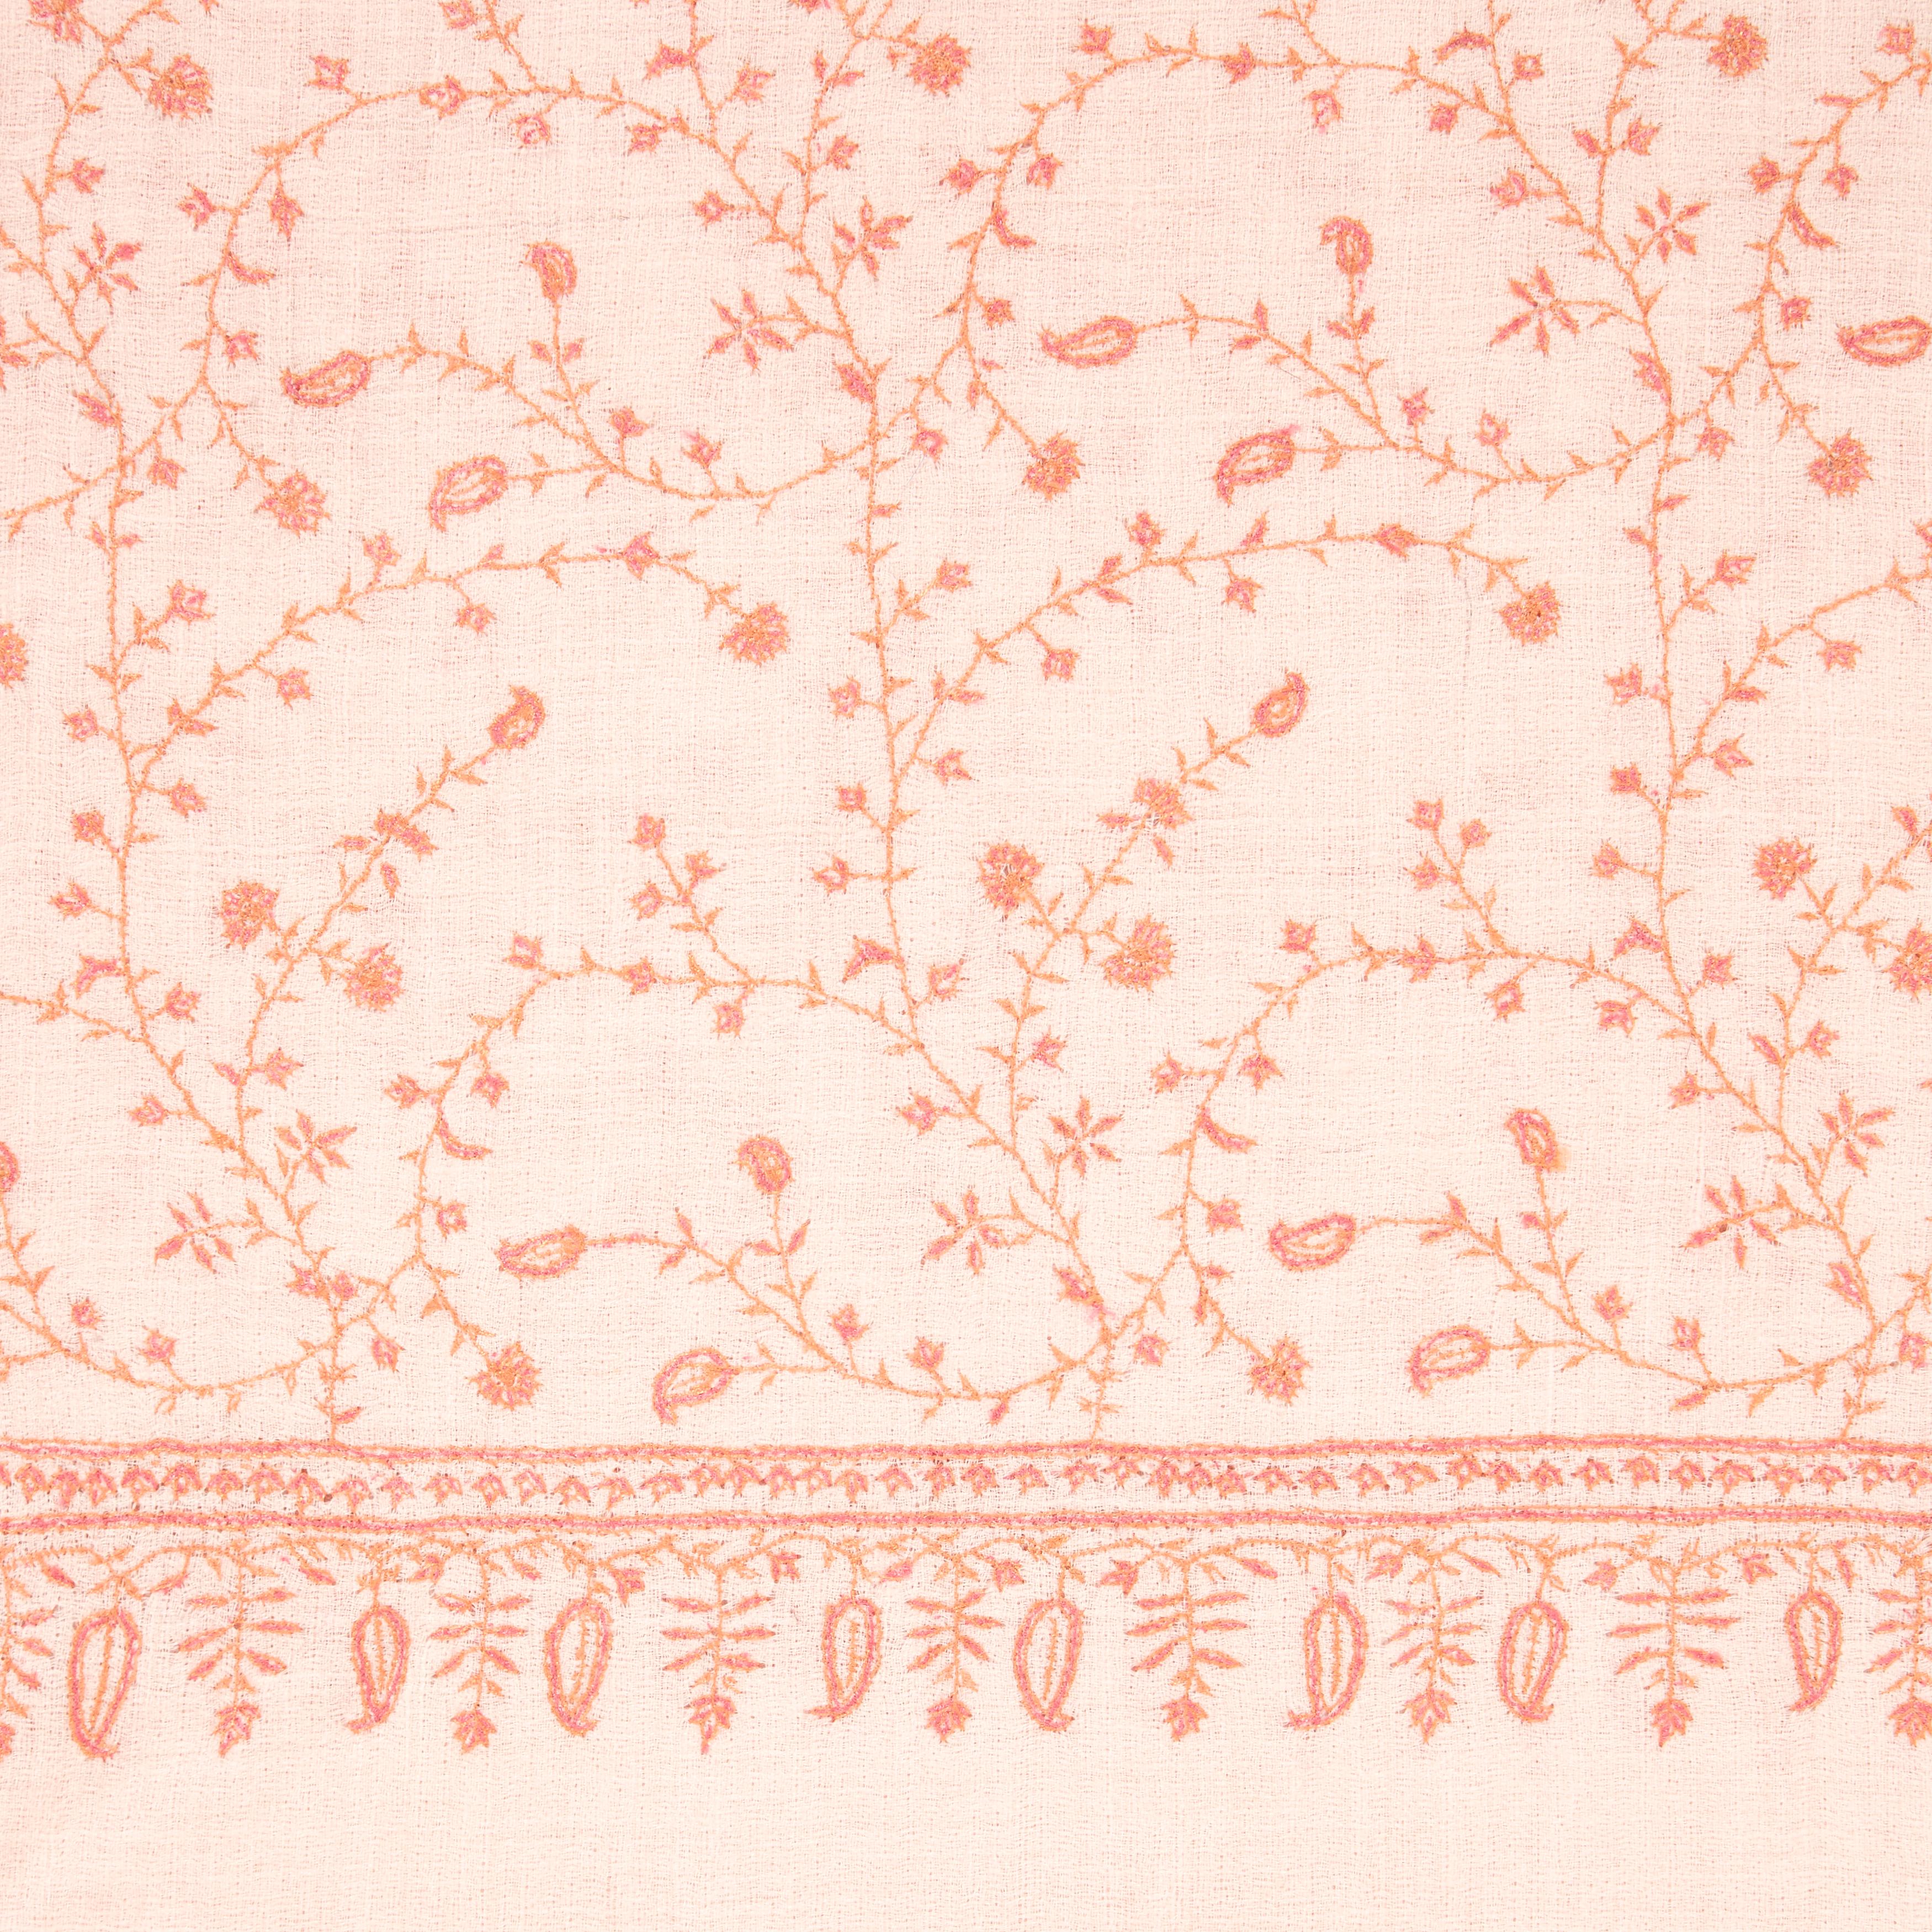 Orange Hand Embroidered Pale Pink 100% Cashmere Shawl made in Kashmir - Brand New 